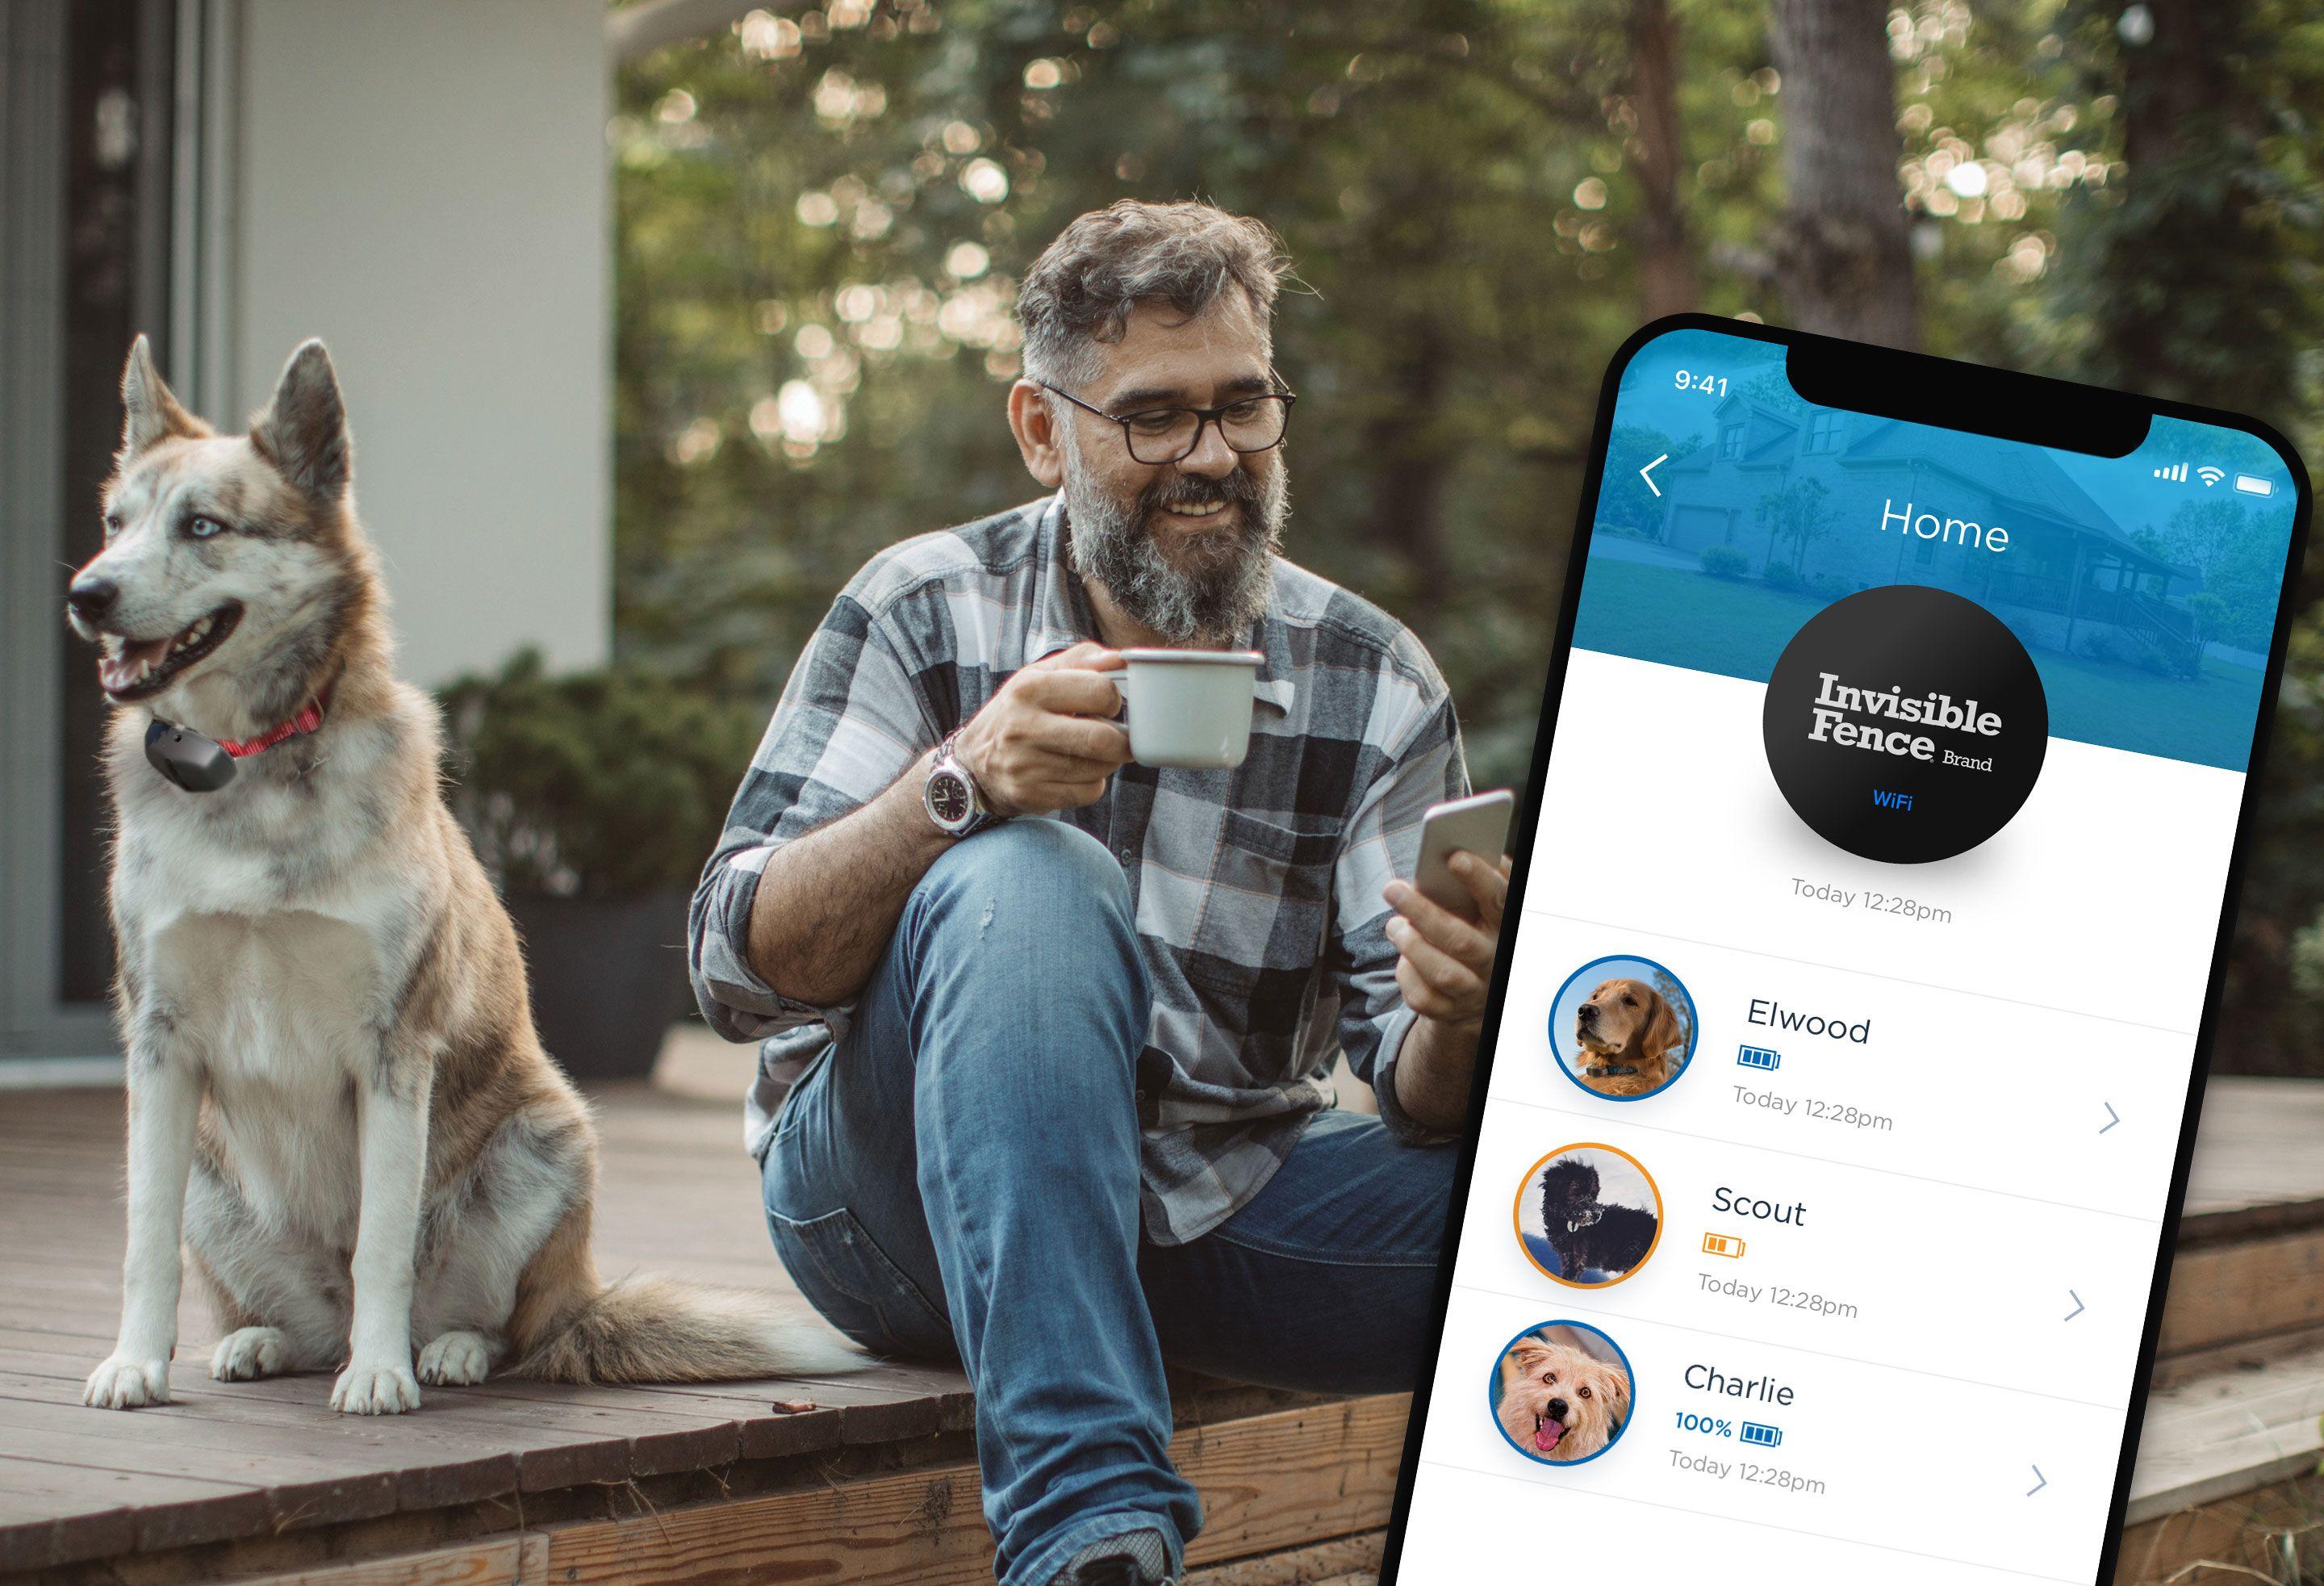 Man sitting on deck with dog, looking at smartphone